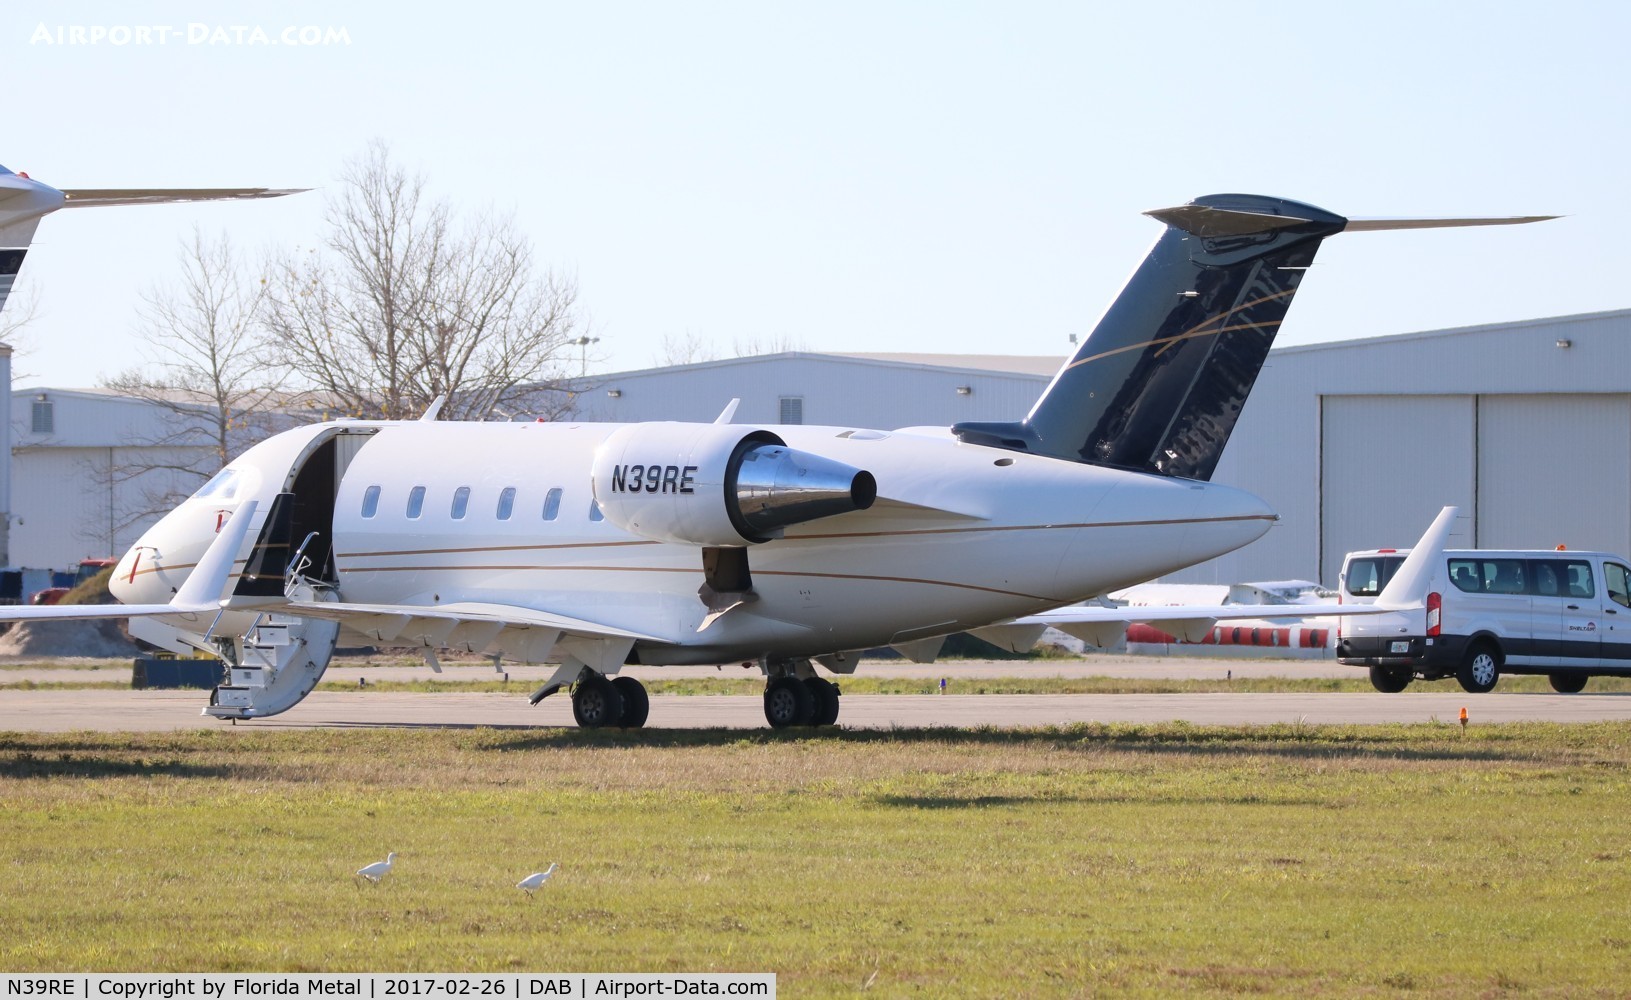 N39RE, 2010 Bombardier Challenger 605 (CL-600-2B16) C/N 5850, Challenger 605